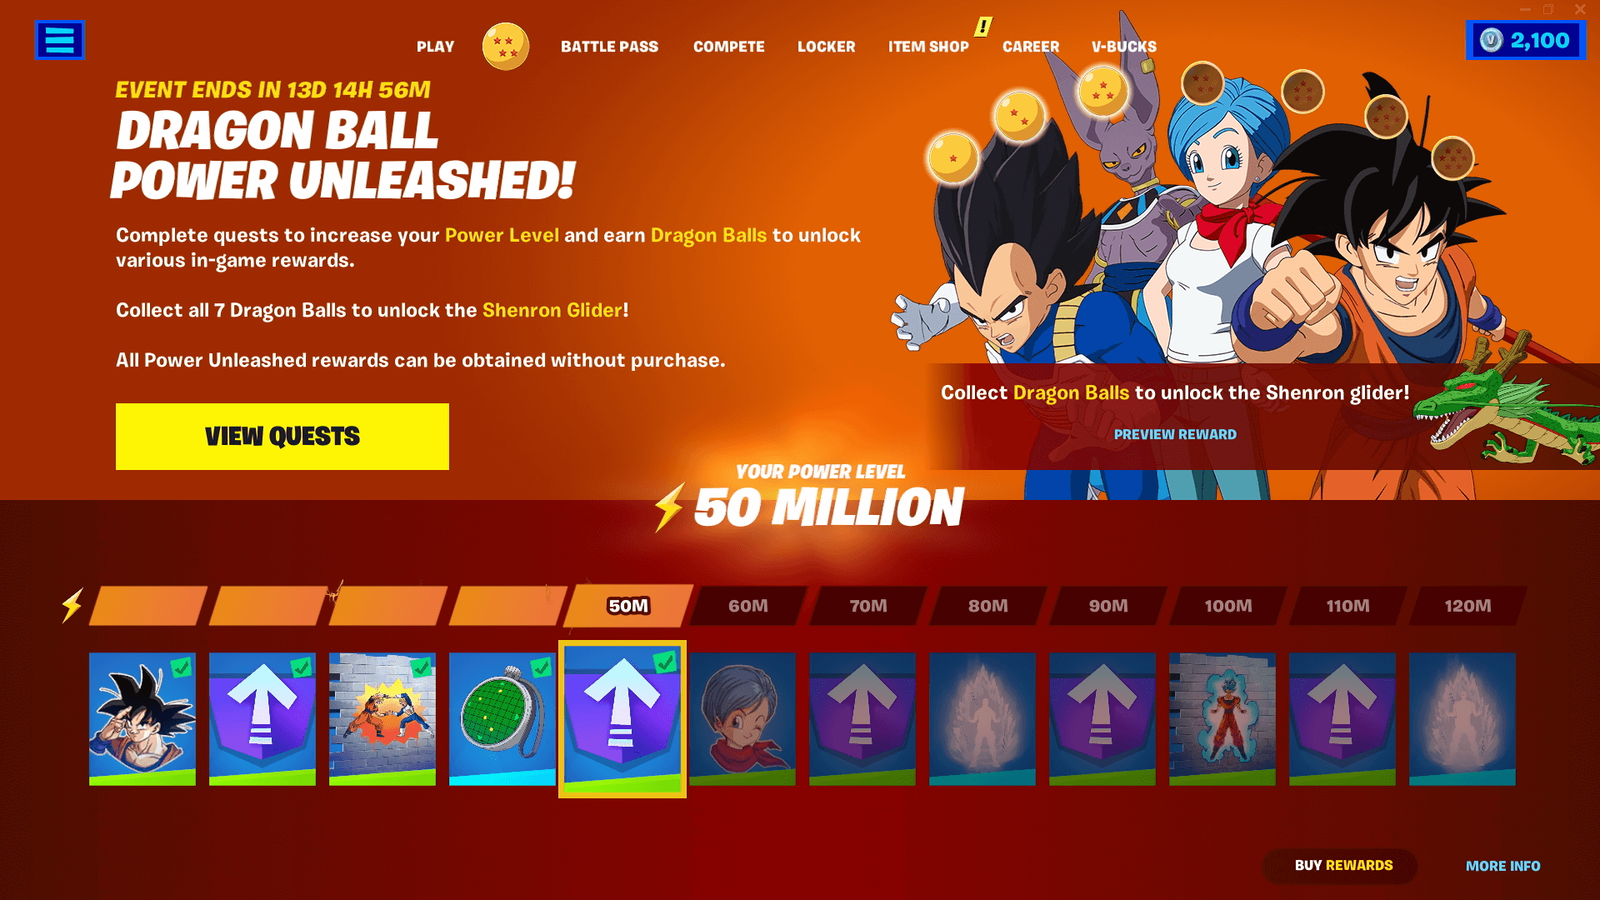 Dragon Ball Quests Available in Fortnite